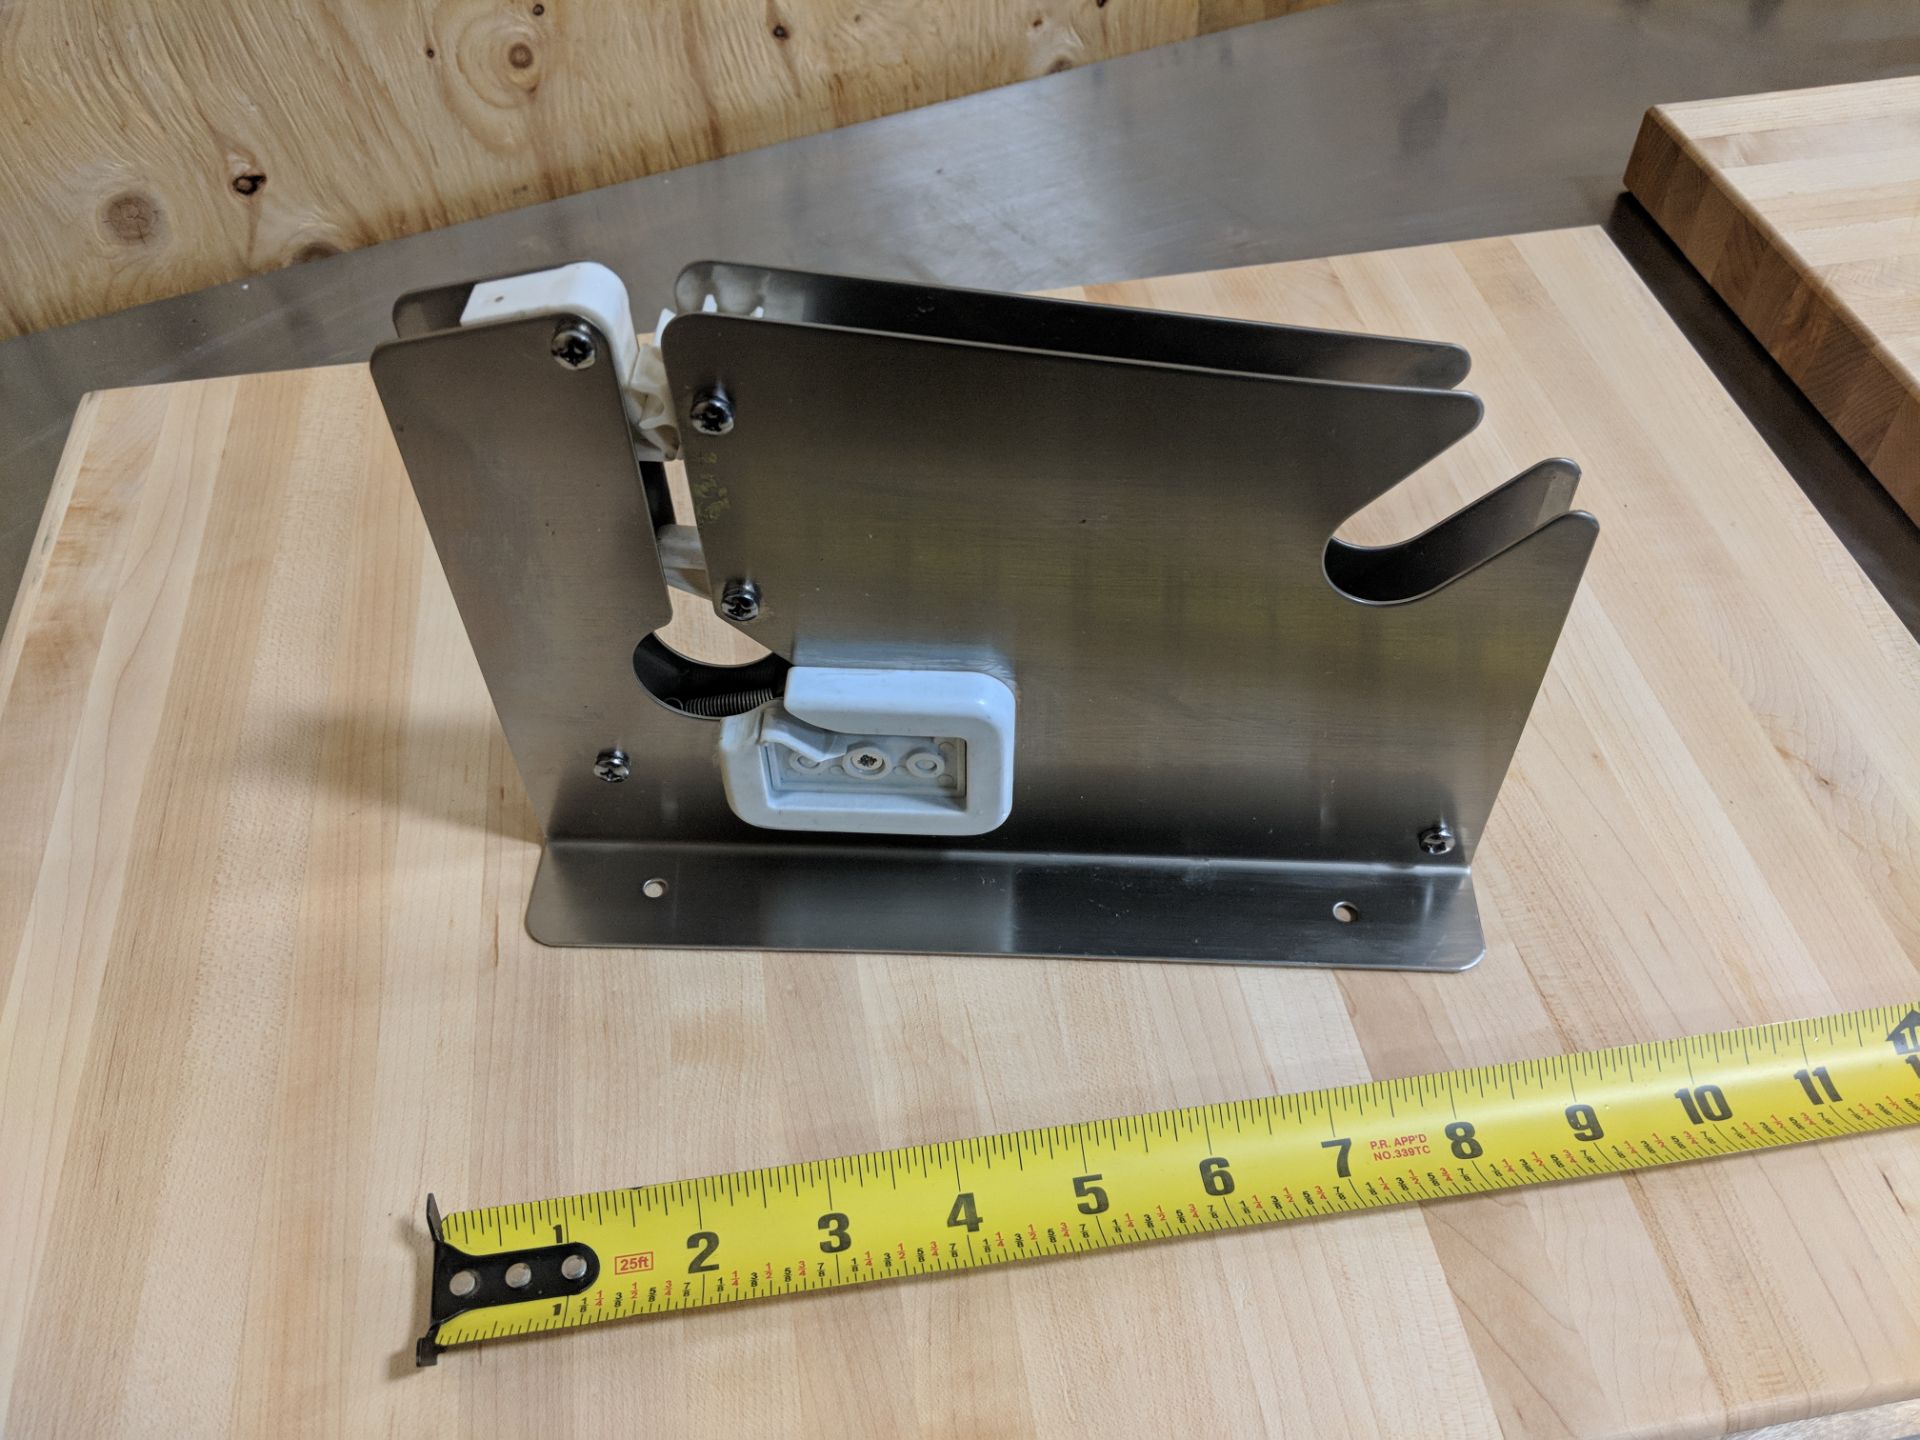 Stainless Table Mount Bag Sealer - Image 2 of 3